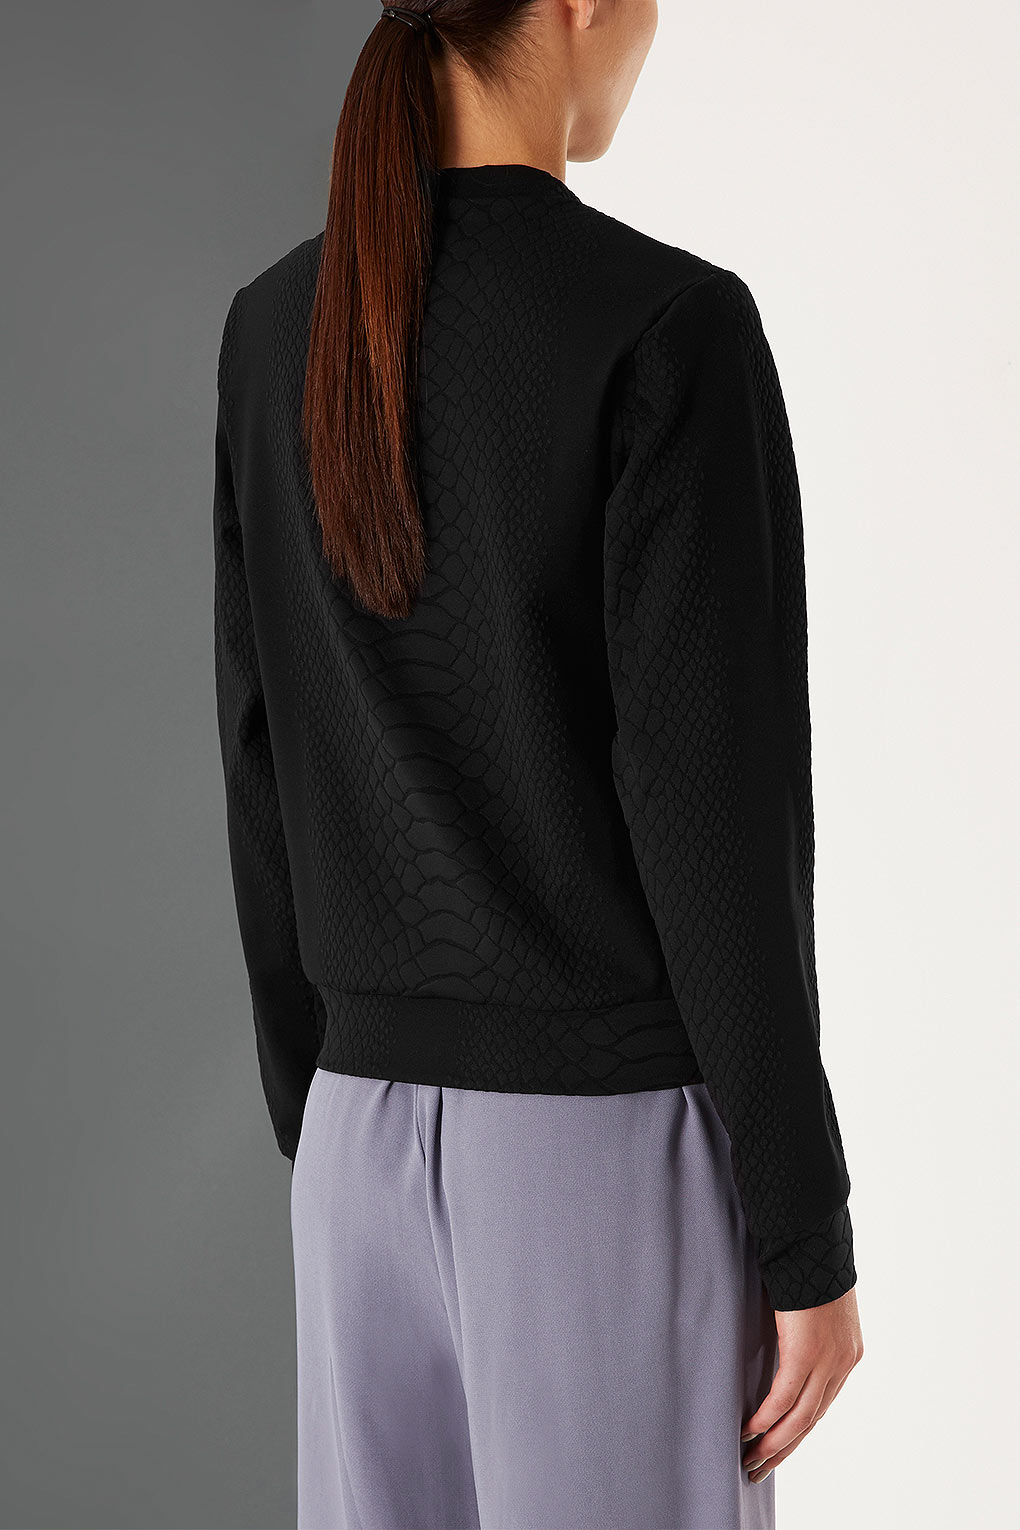 Lyst - Topshop Premium Snake Sweat By Boutique in Black